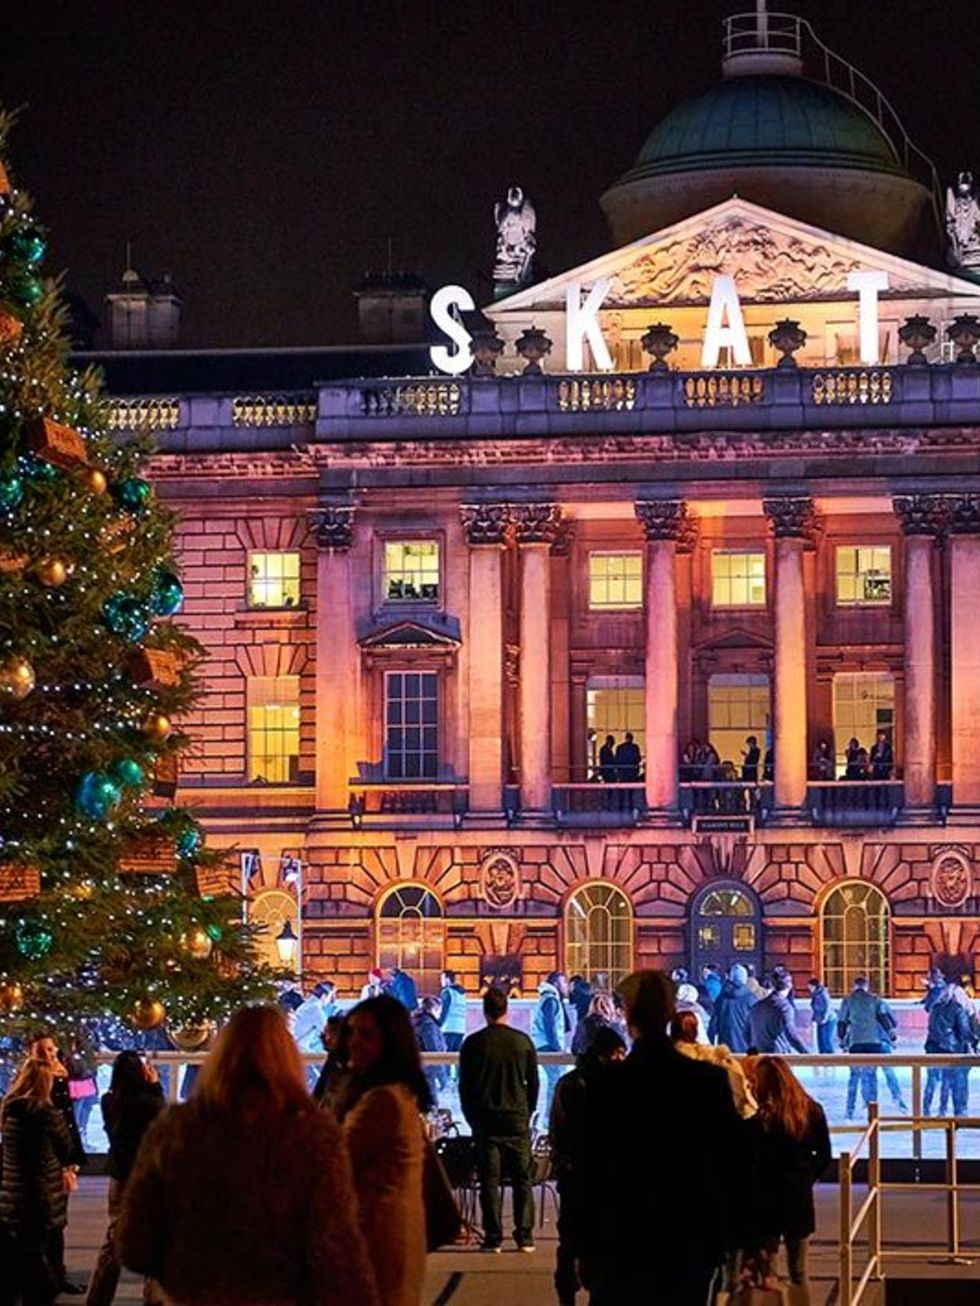 <p>POP-UP: Skate at Somerset House </p>

<p>And Christmas is officially... Go! Which means it's time to whirl, twirl and pirouette (or cling desperately to the side) at this, London's most romantic outdoor ice rink. As well as the chance to get slip-slide